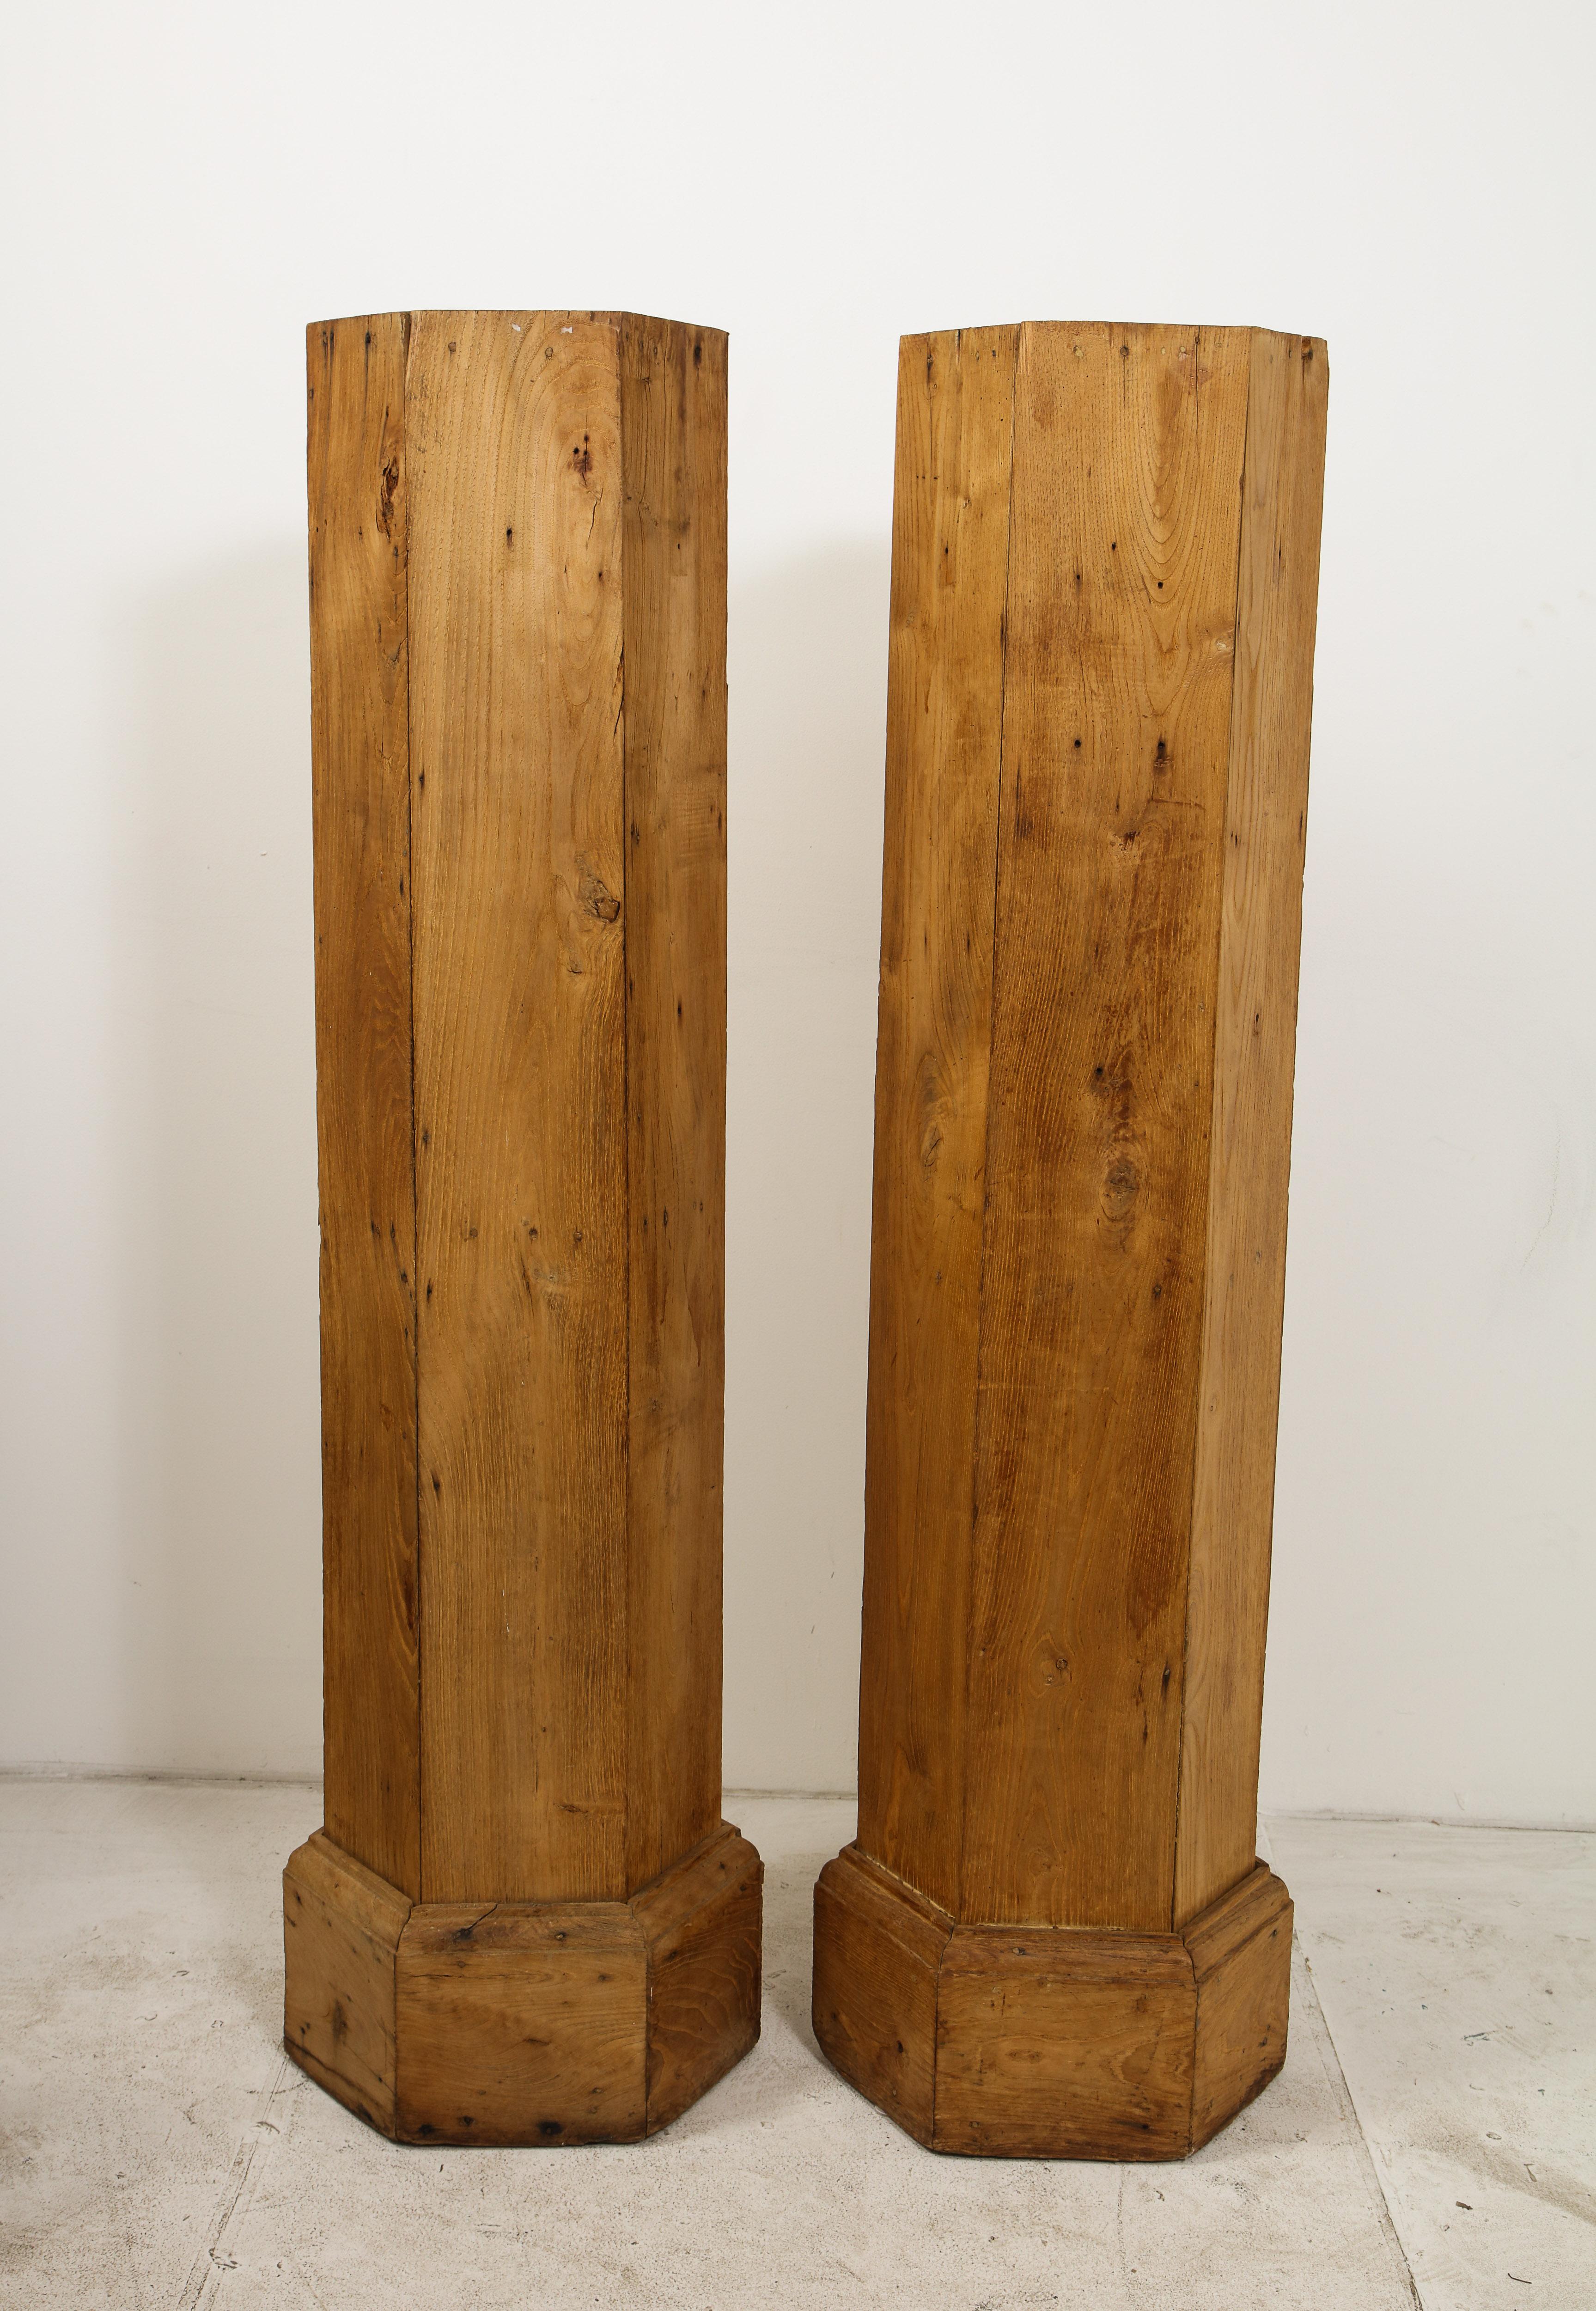 Pair of 19th century Belgian squared-sided wood podiums.
Measures: 15